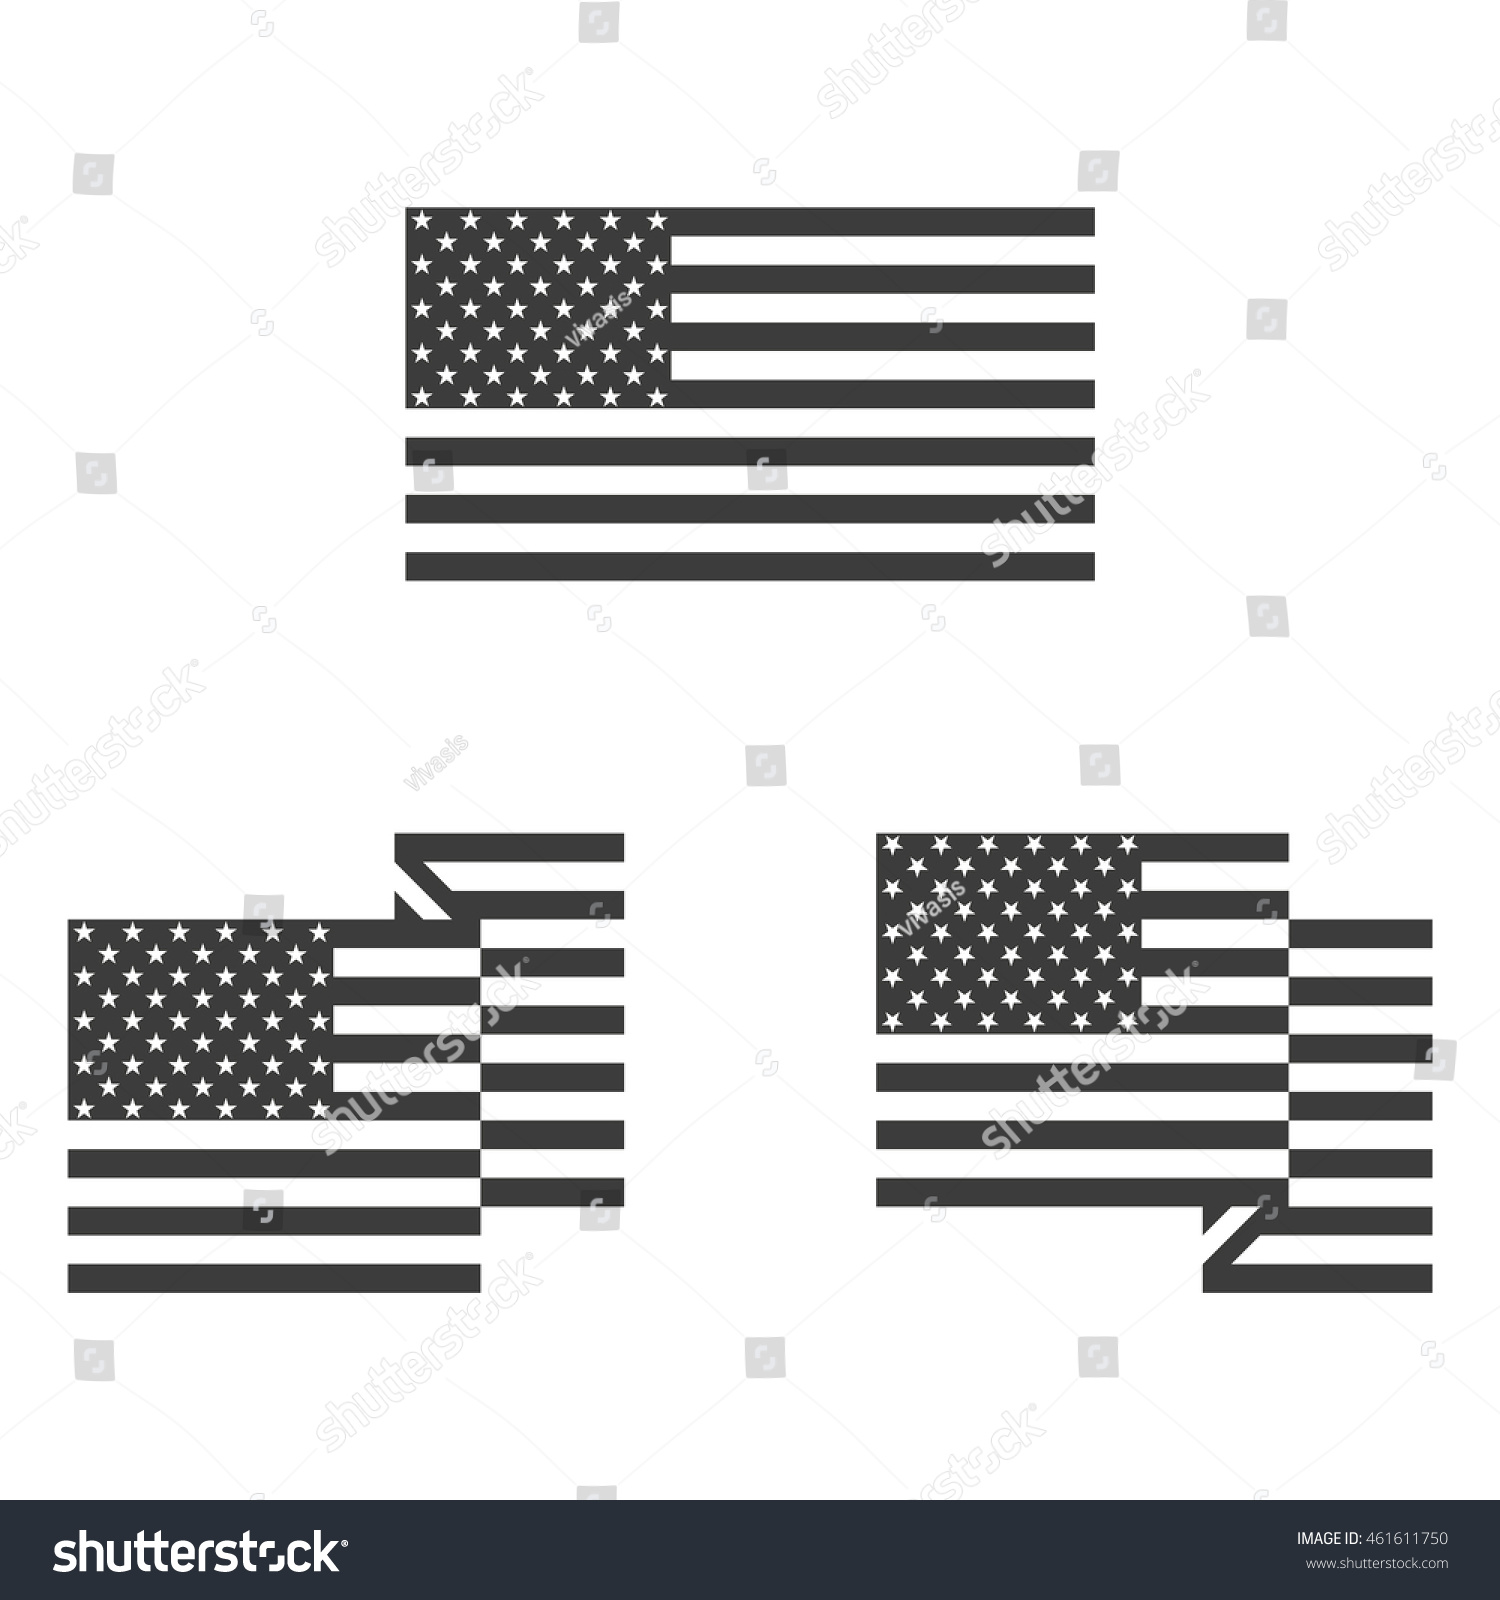 icon of the United States flag in black and white. vector illustration #461611750